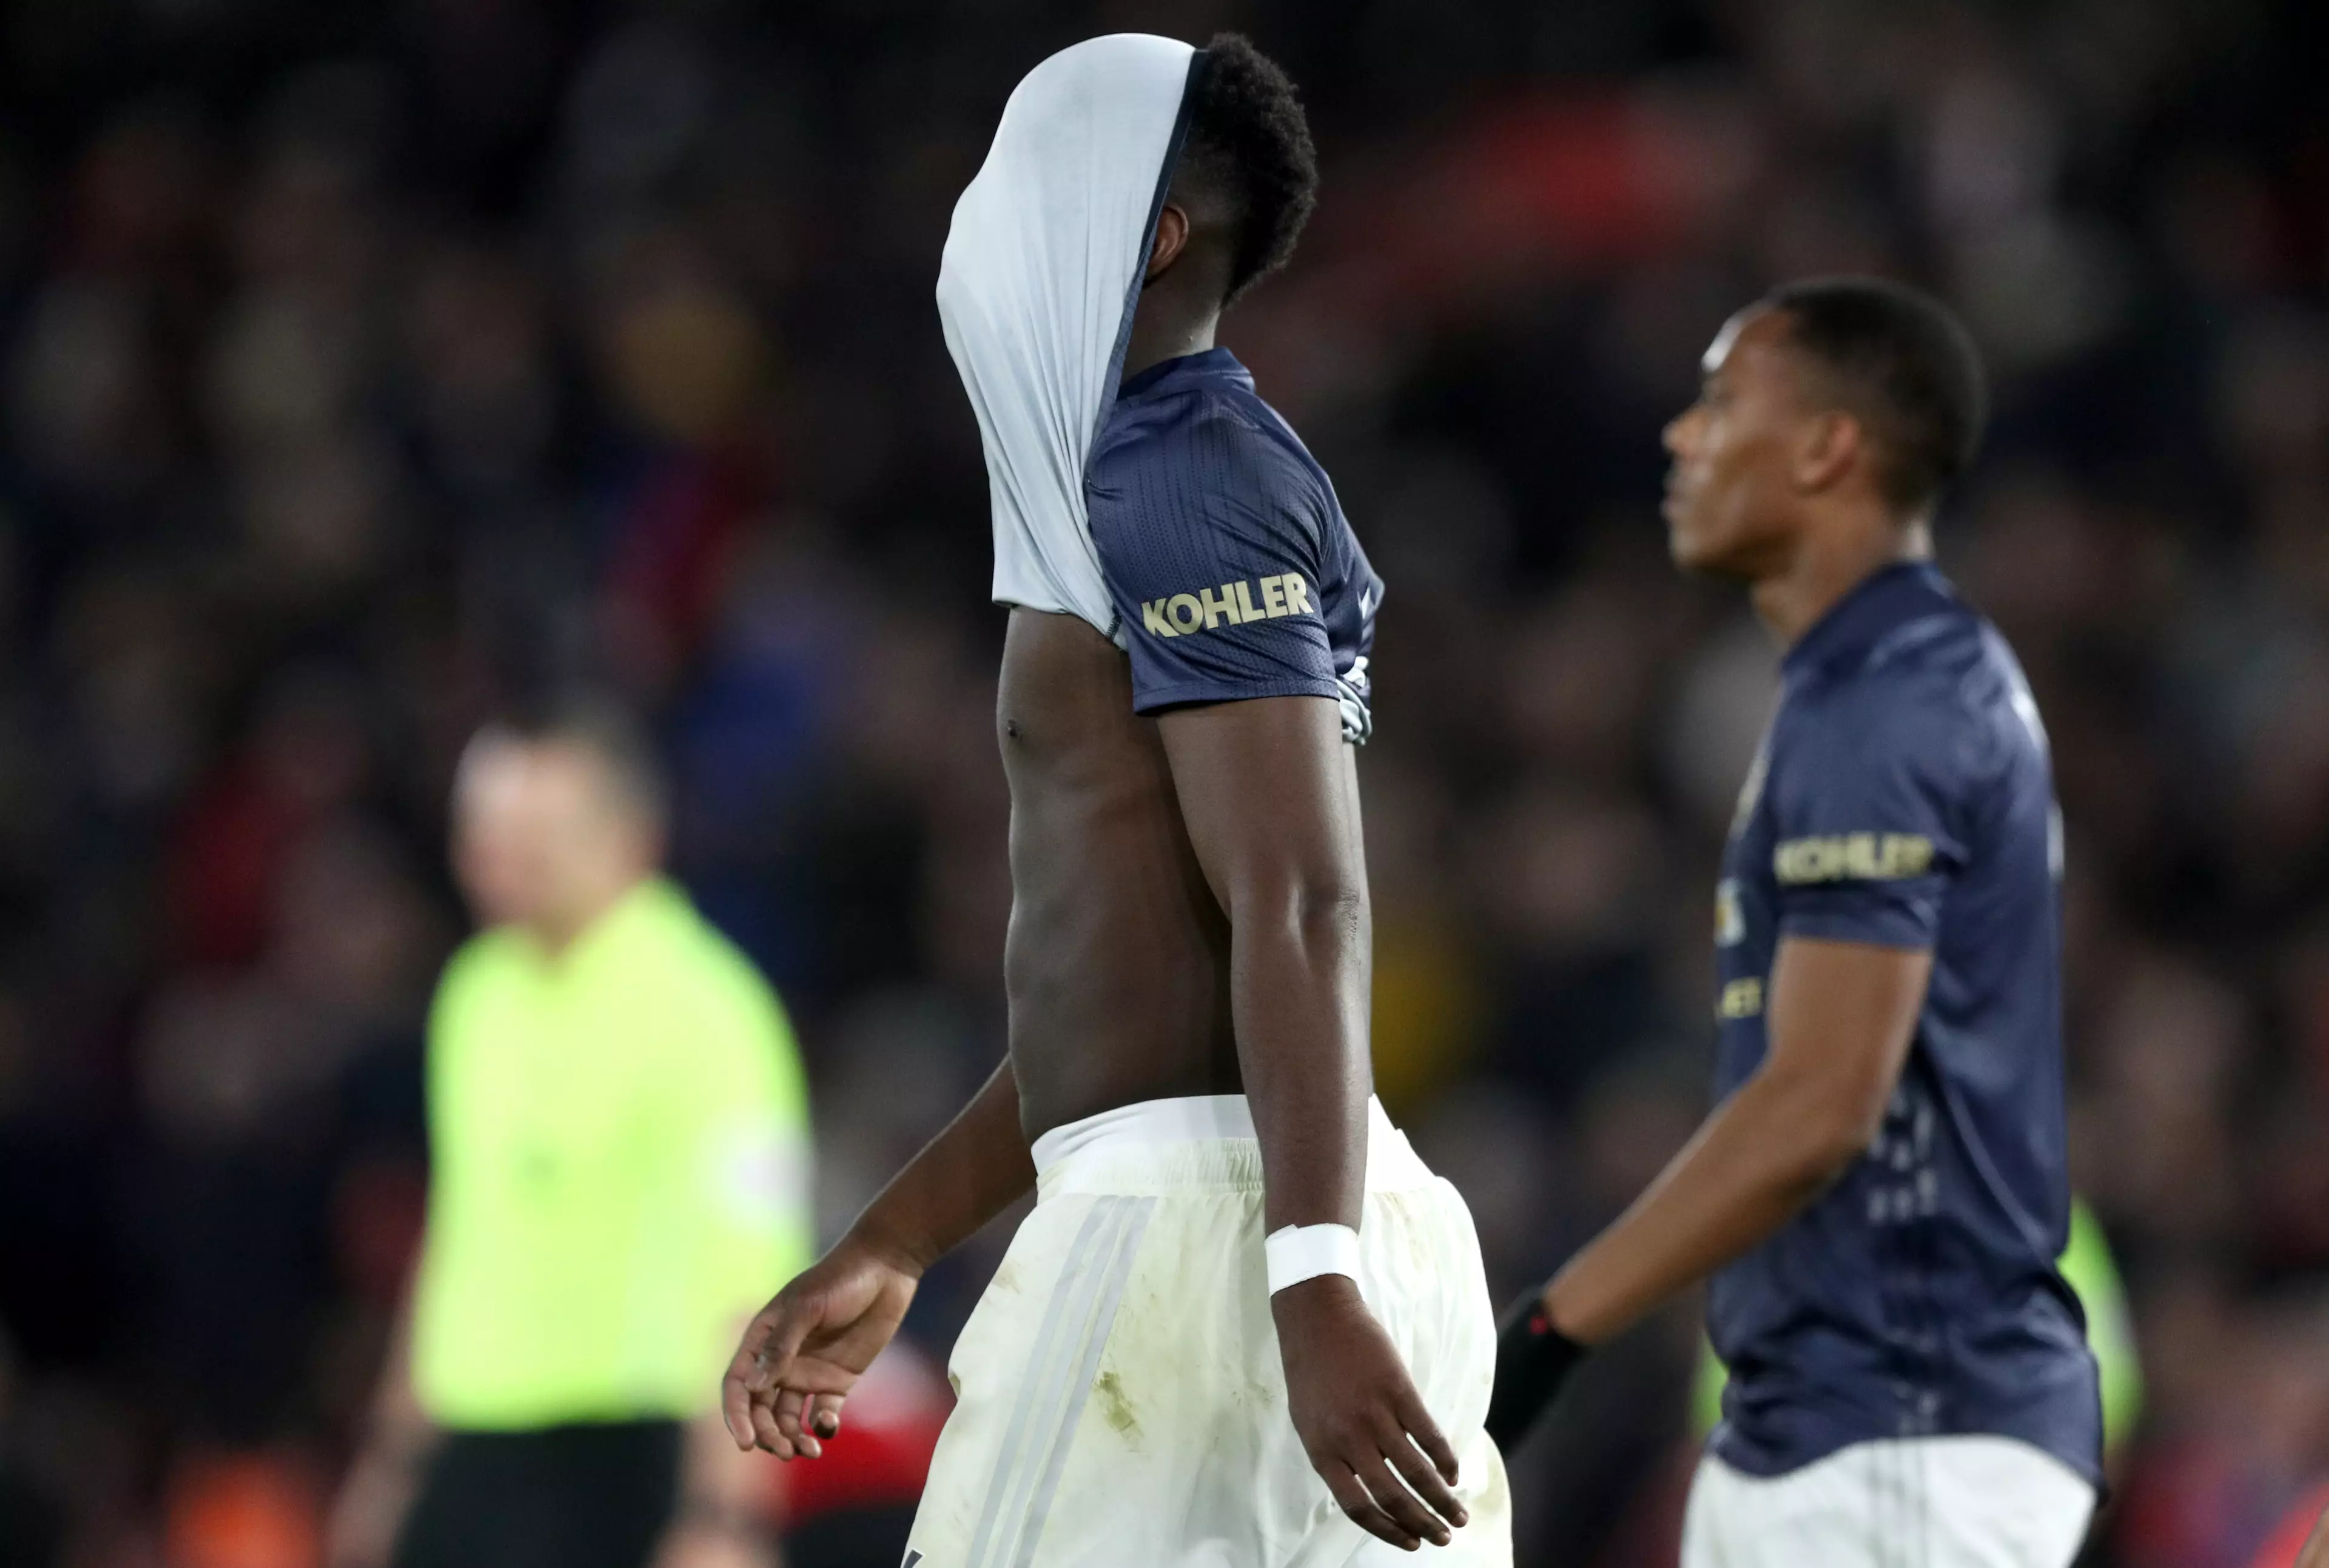 Pogba sums up the mood after United's 2-2 draw with Southampton. Image: PA Images